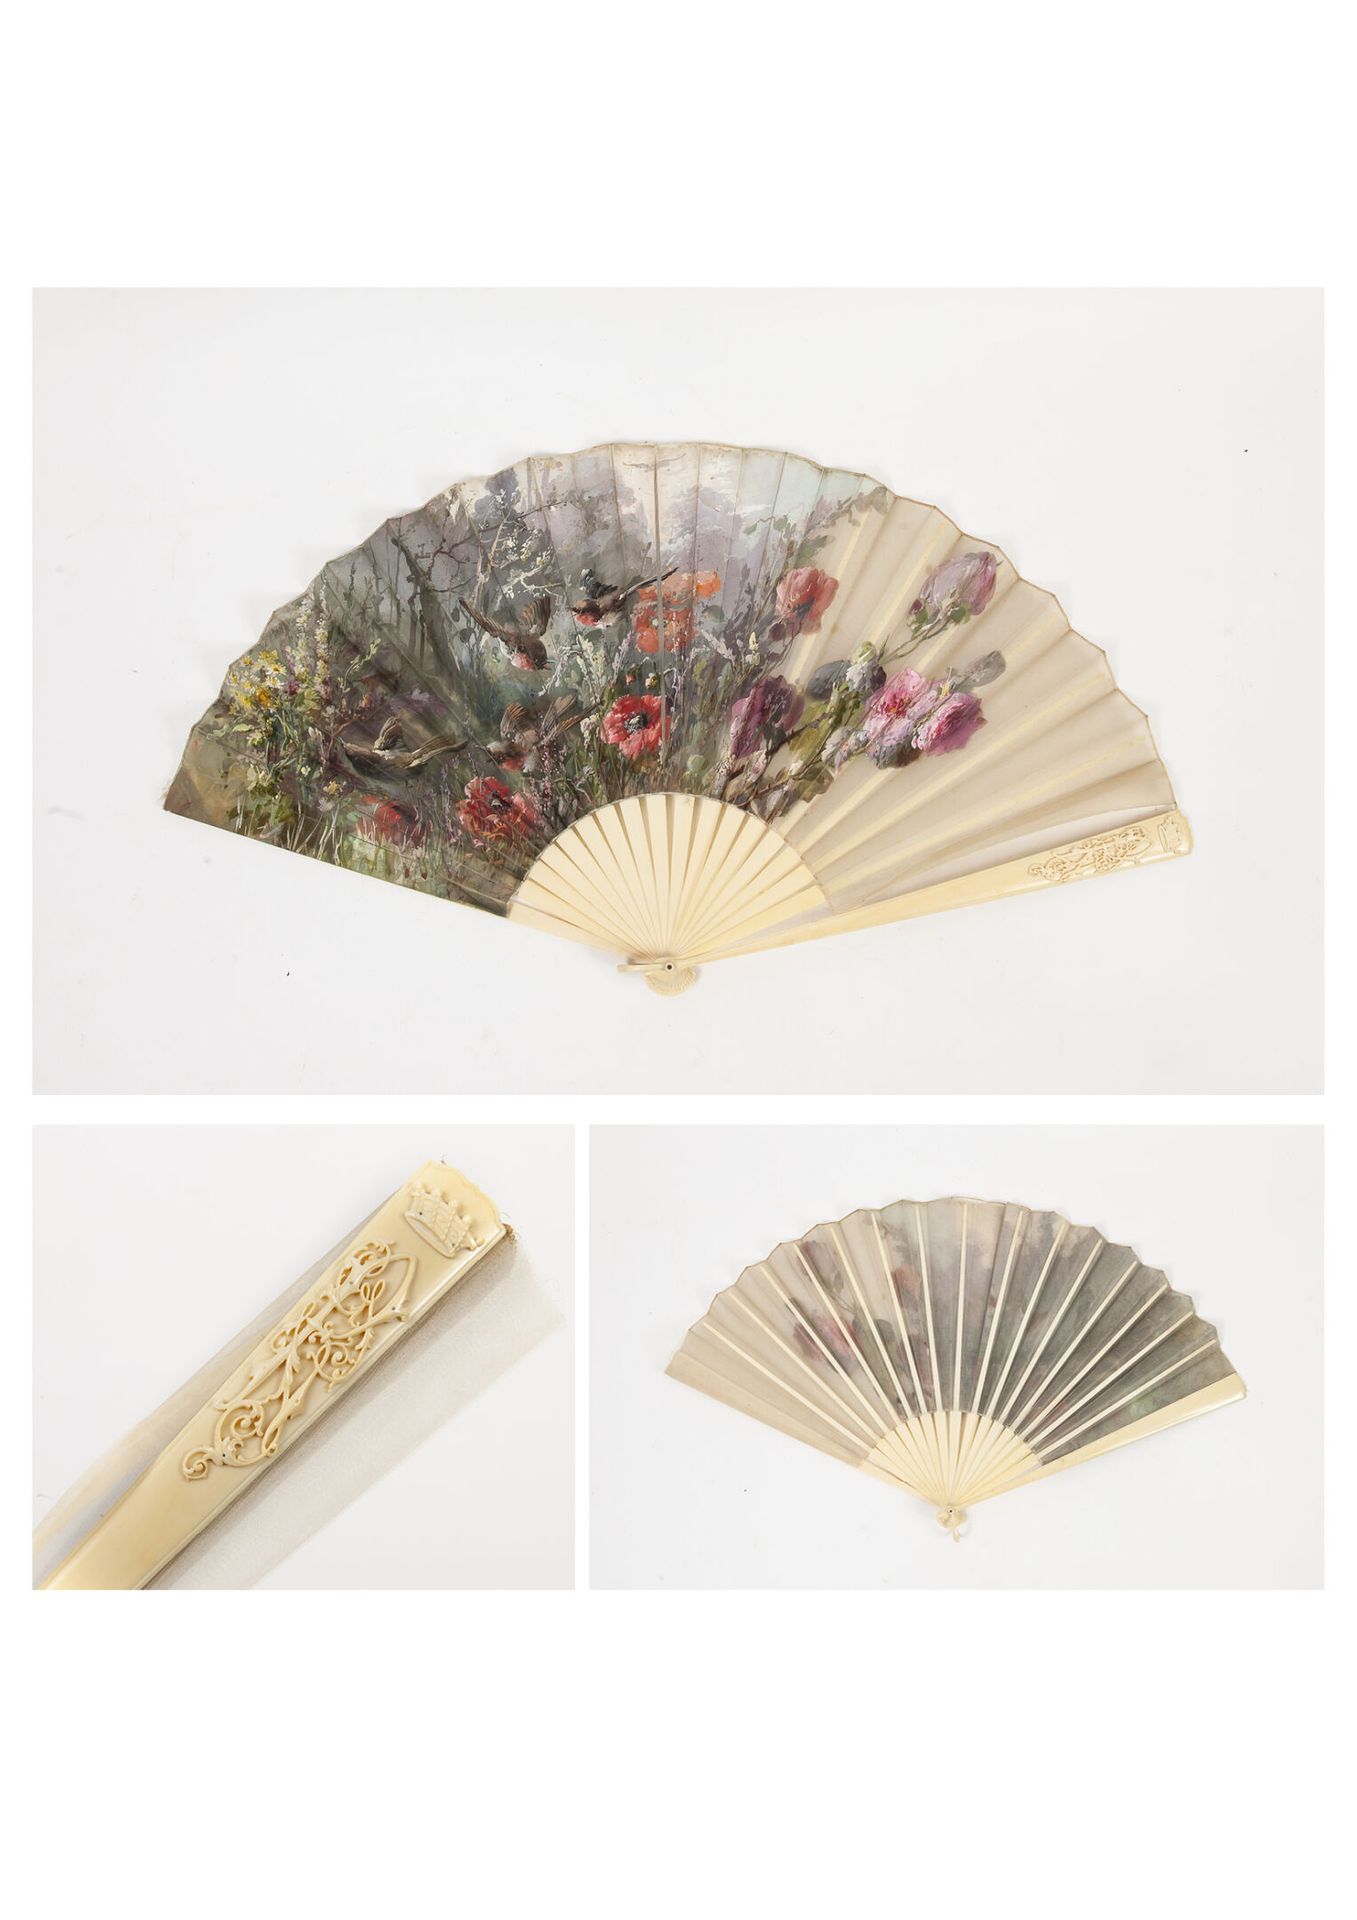 FRANCE, vers 1880-1900 Folded fan.

Gauze leaf painted with red-throated birds f&hellip;